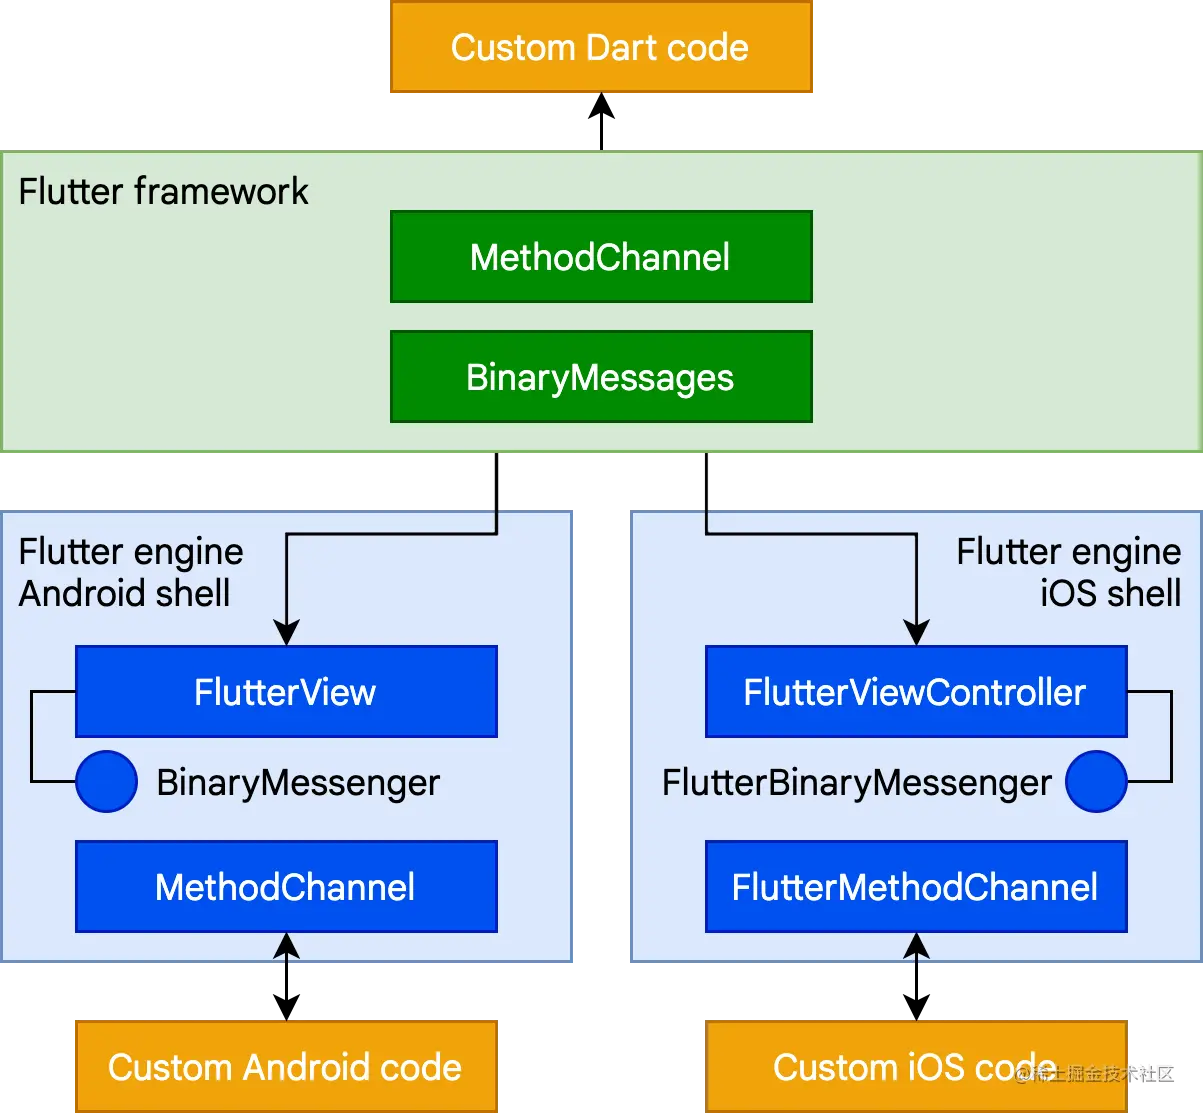 How platform channels allow Flutter to communicate with host
code